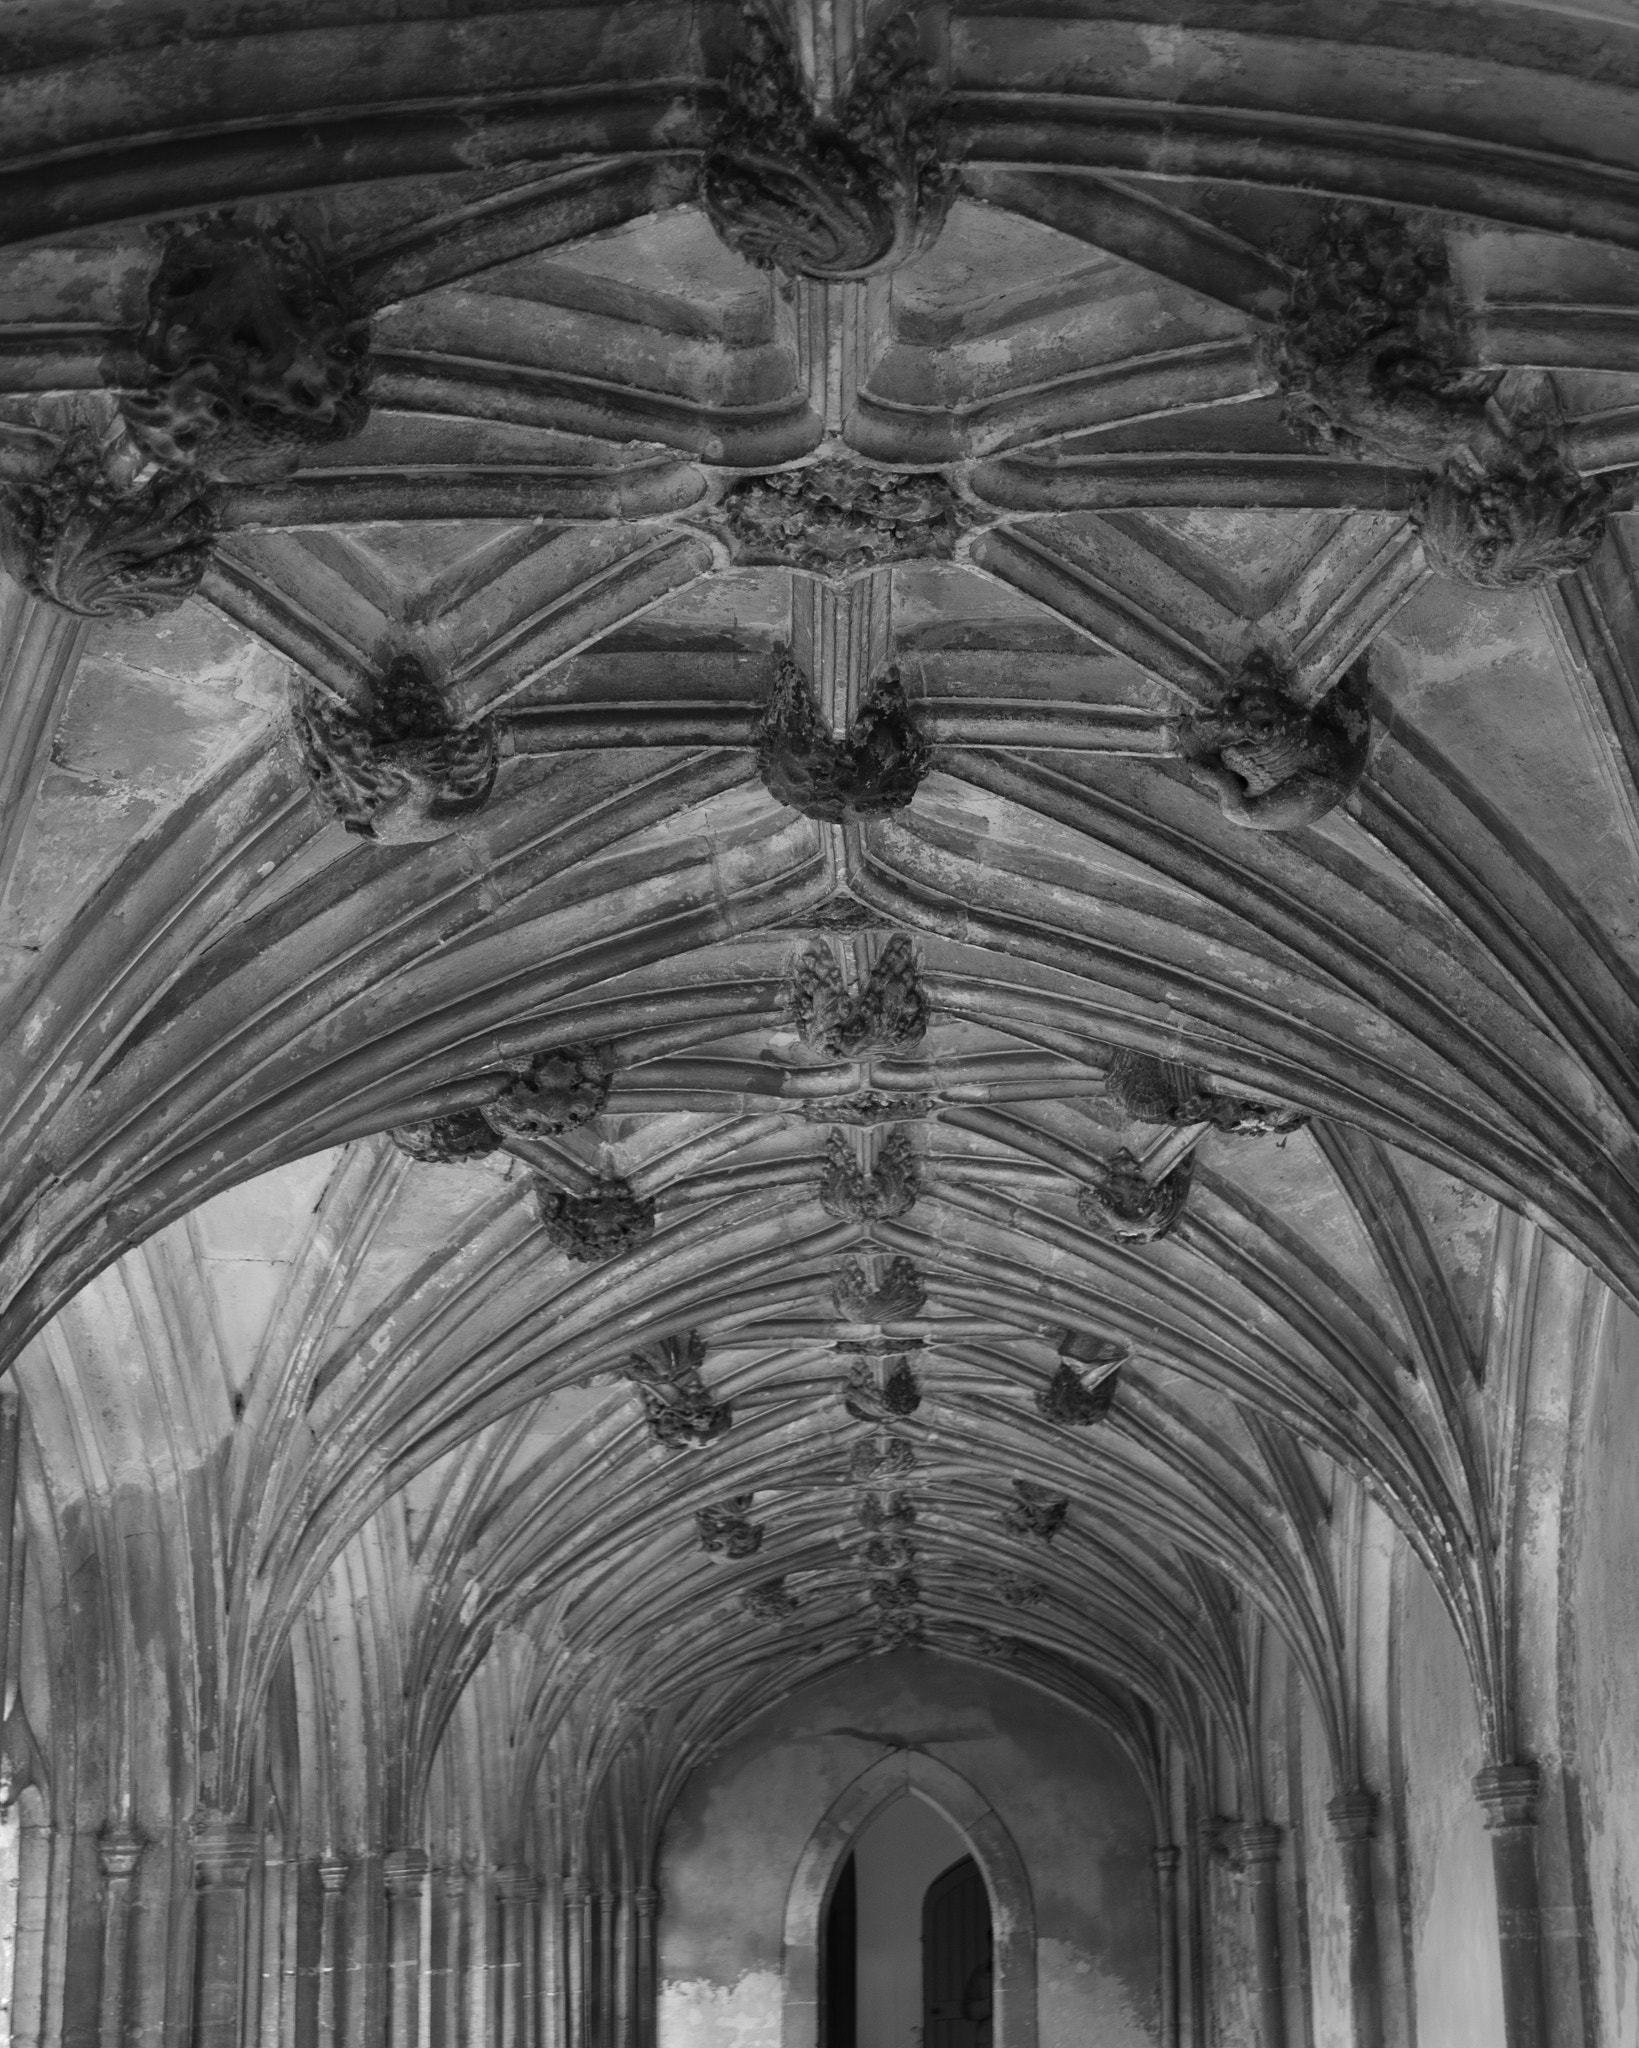 Pentax K-3 II sample photo. Lacock abbey ceiling photography